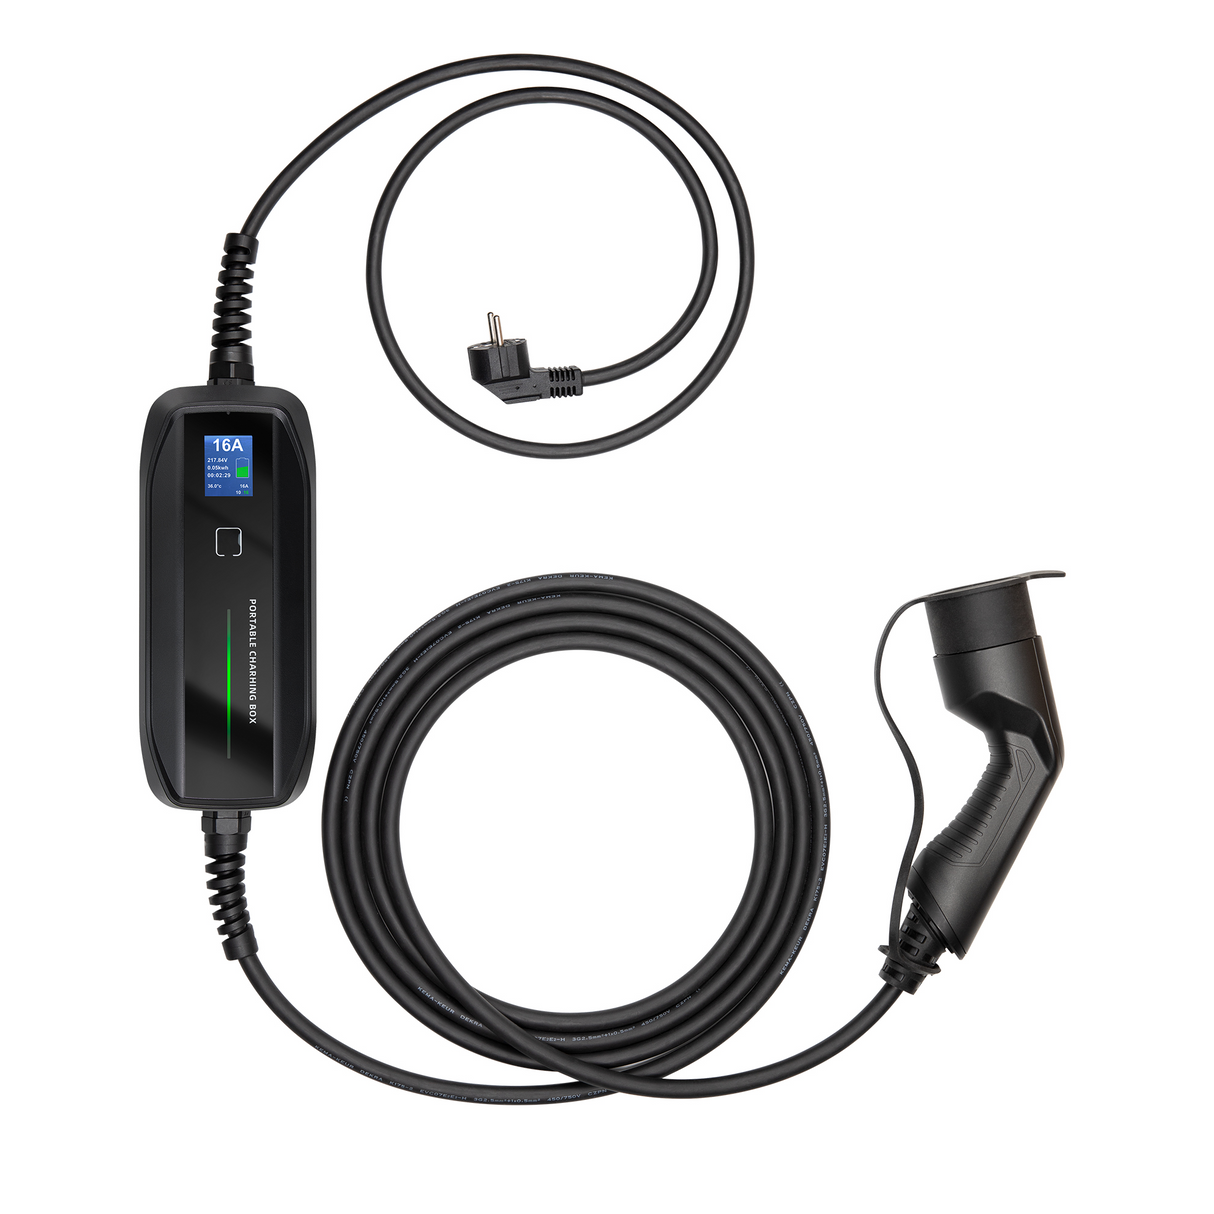 Mobile Charger Volkswagen Golf - LCD Black Type 2 to Schuko